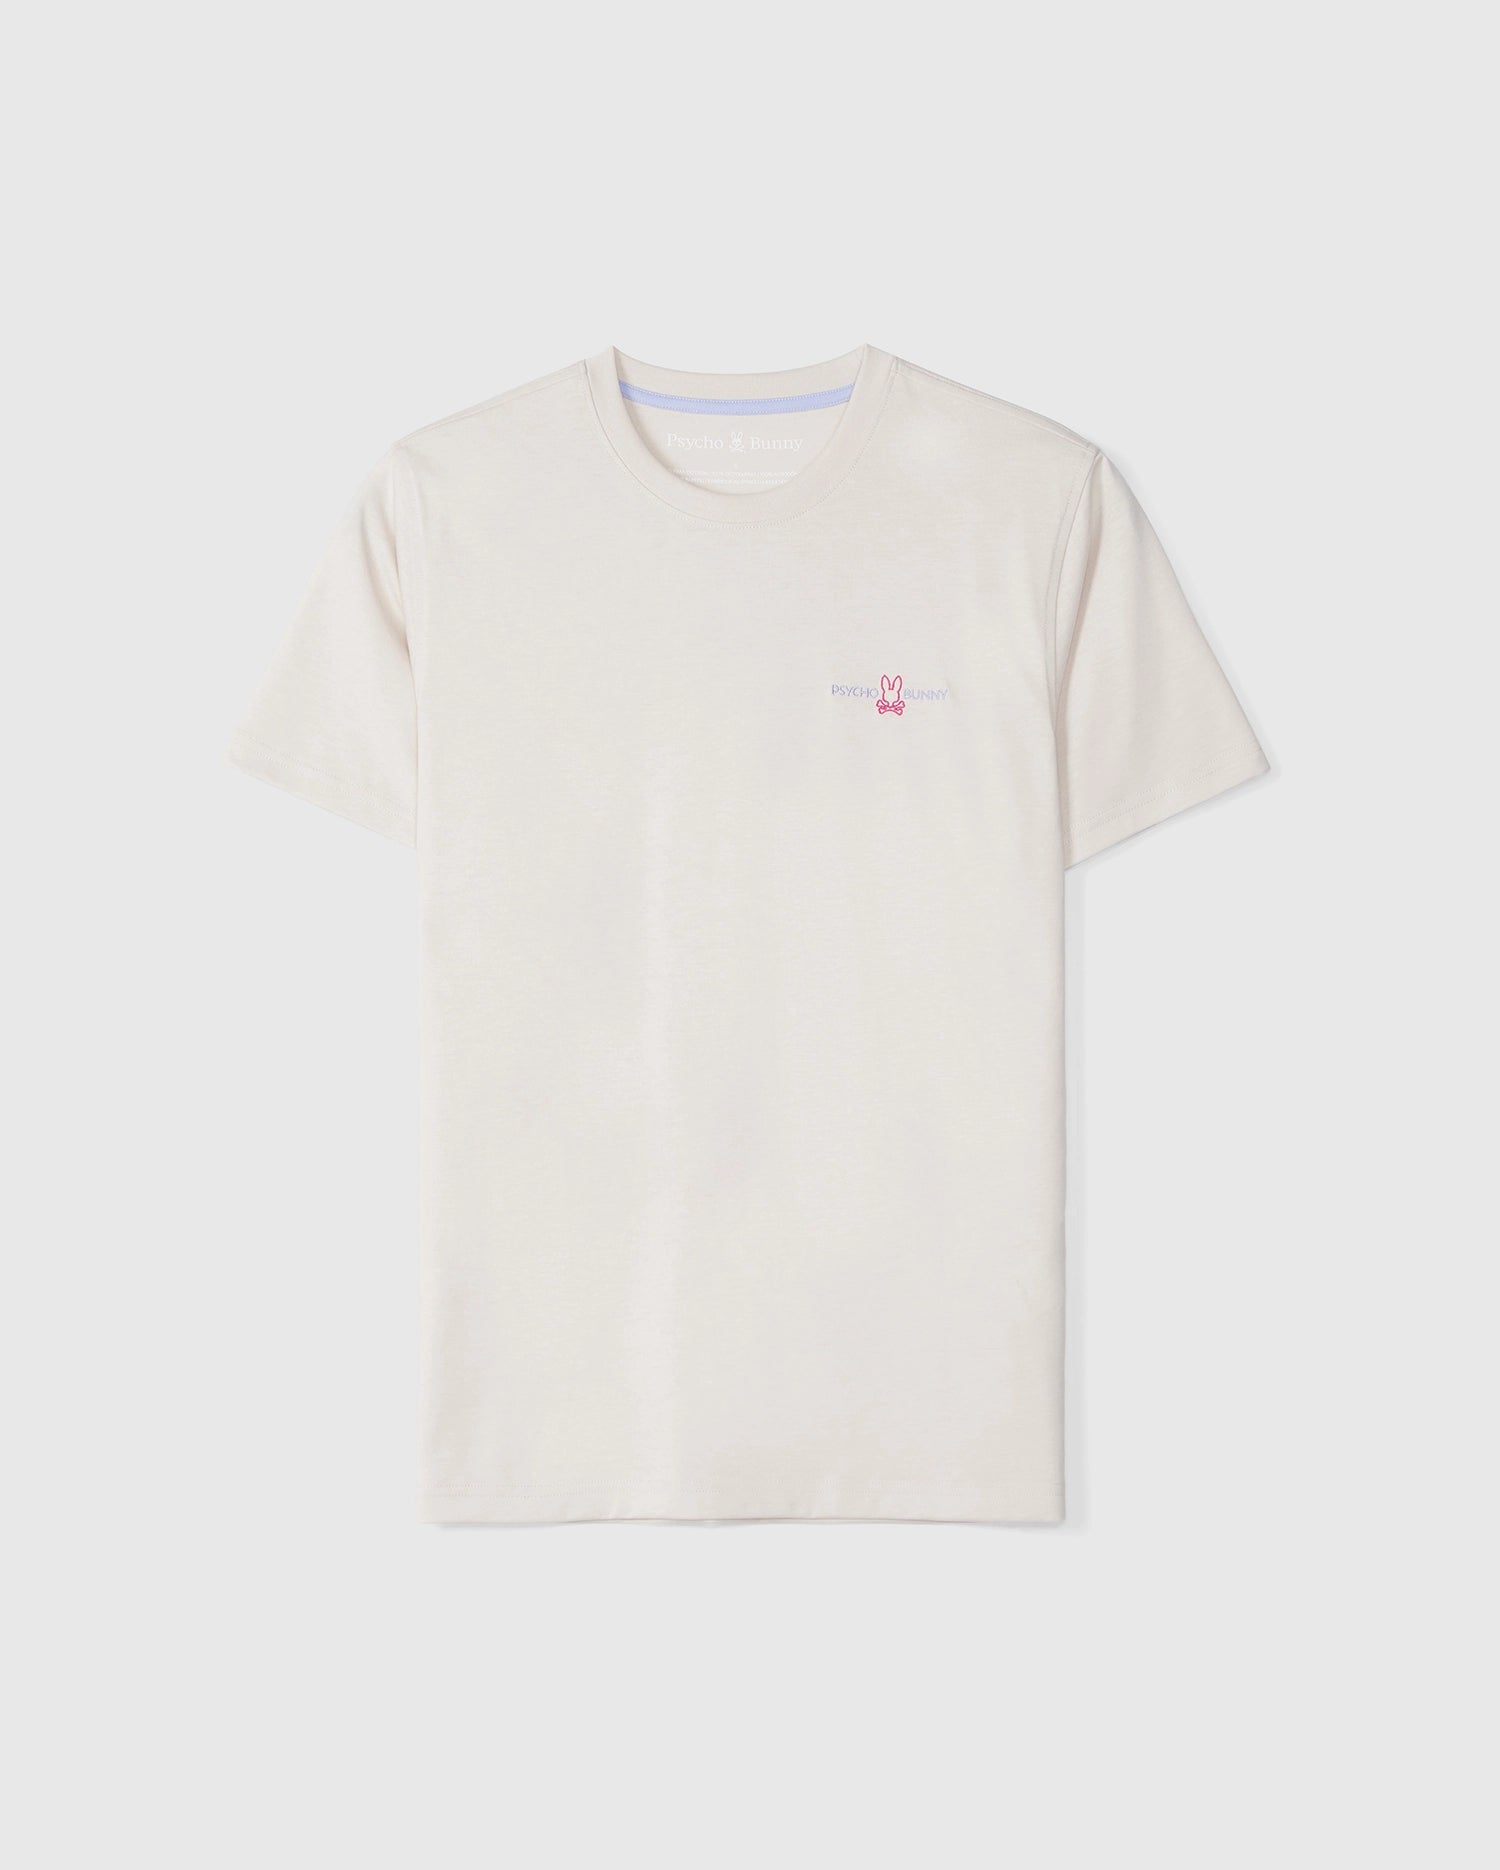 A plain cream-colored t-shirt made of Peruvian Pima cotton with a small pink heart emblem and the text 